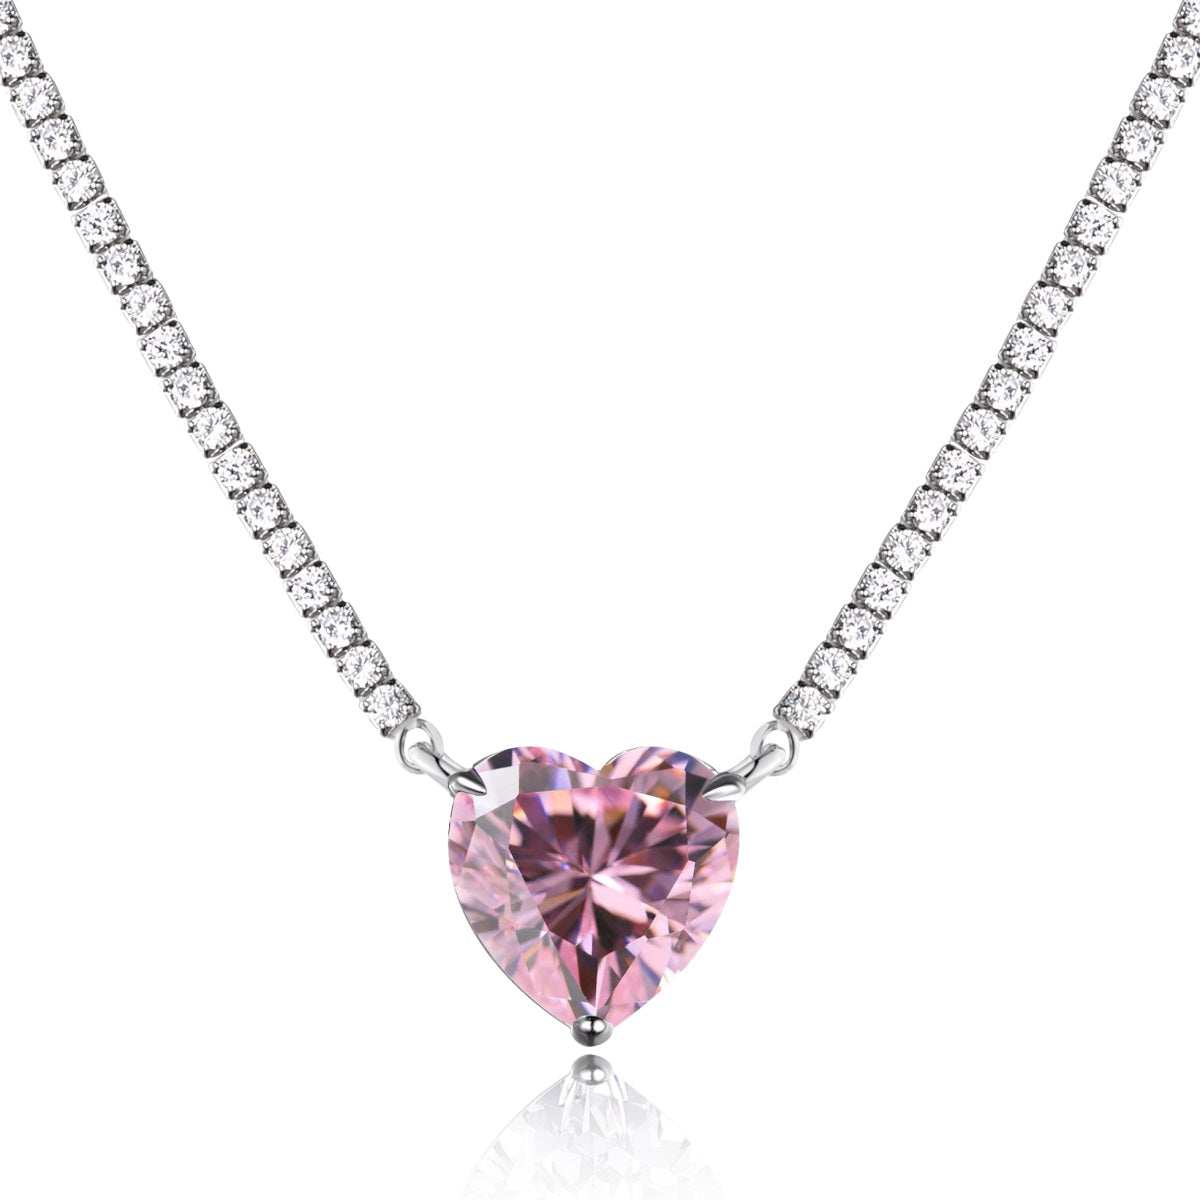 Pink Heart Tennis Necklace